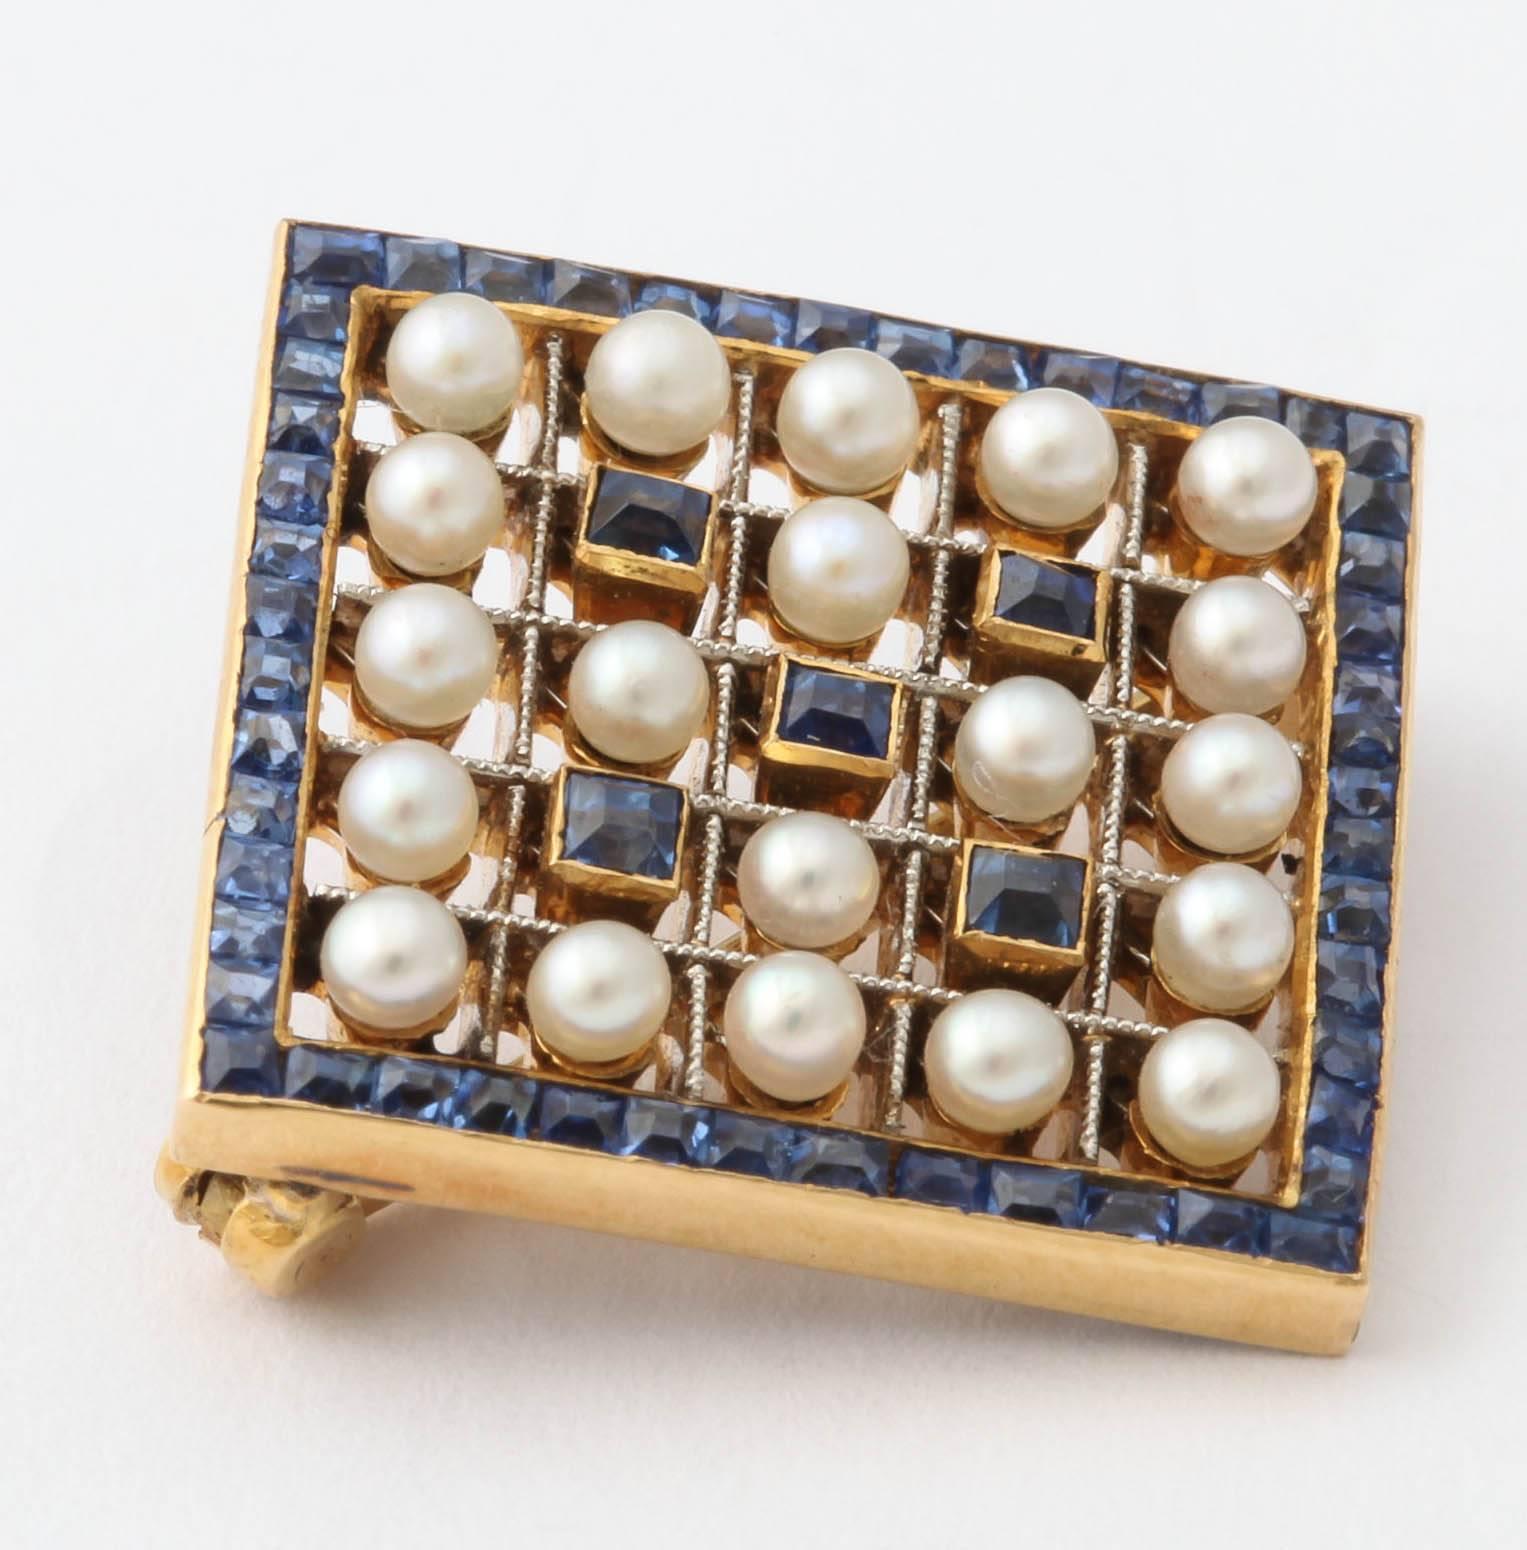 An exquisite diamond-shaped pin forming an openwork 18k gold lattice set with alternating square-cut sapphires and small lustrous pearls. The border is channel-set with square-cut sapphires. In its original fitted case stamped D. J. Wellby Ltd.,